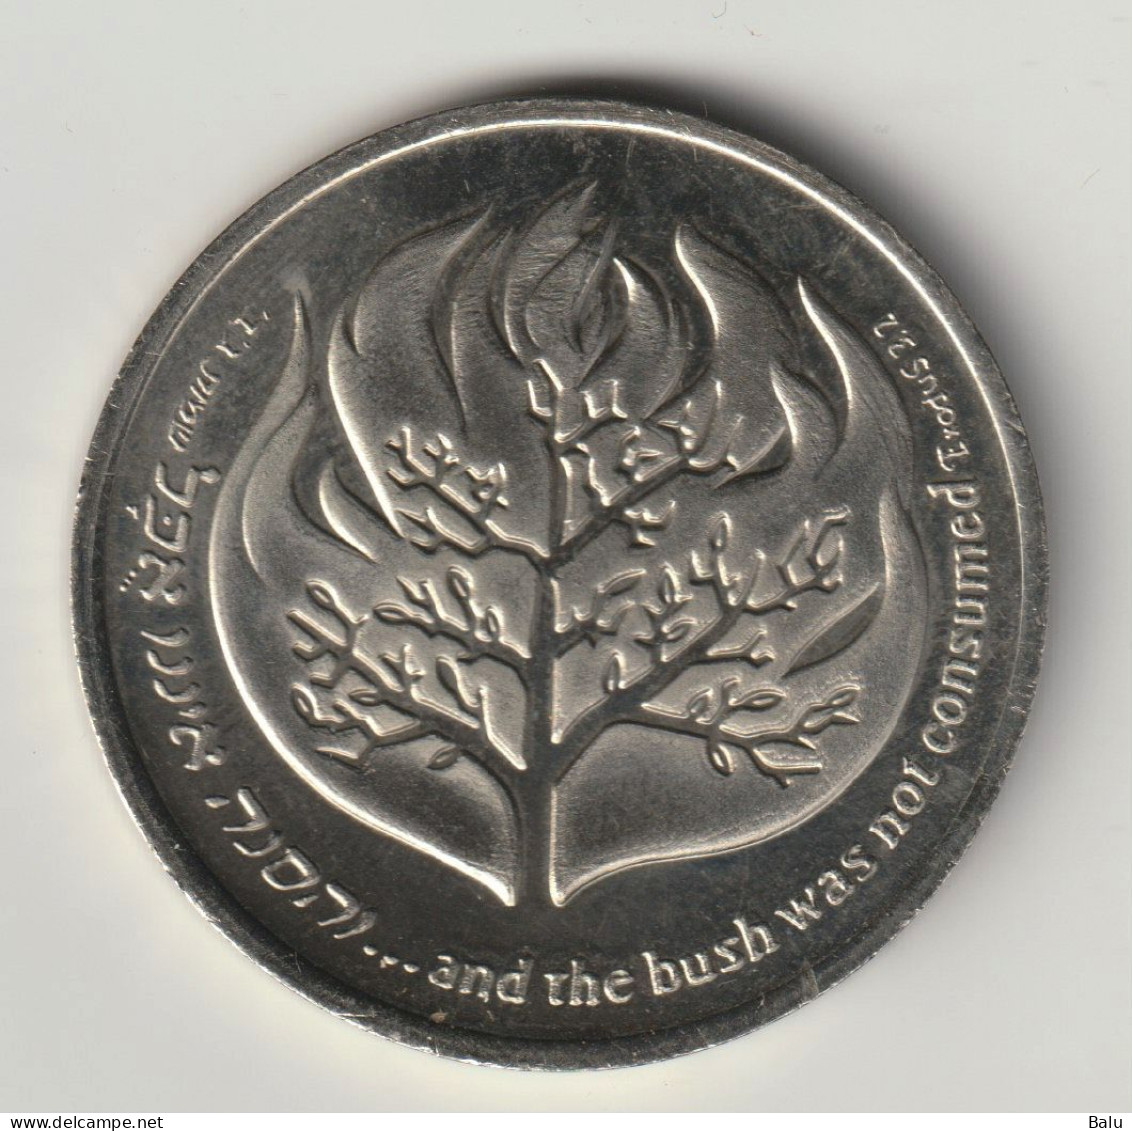 1996 Medaille. Israel. In Appreciation To Our Outstanding Subscribers. ... And The Bush Was Not Consumed - Israel